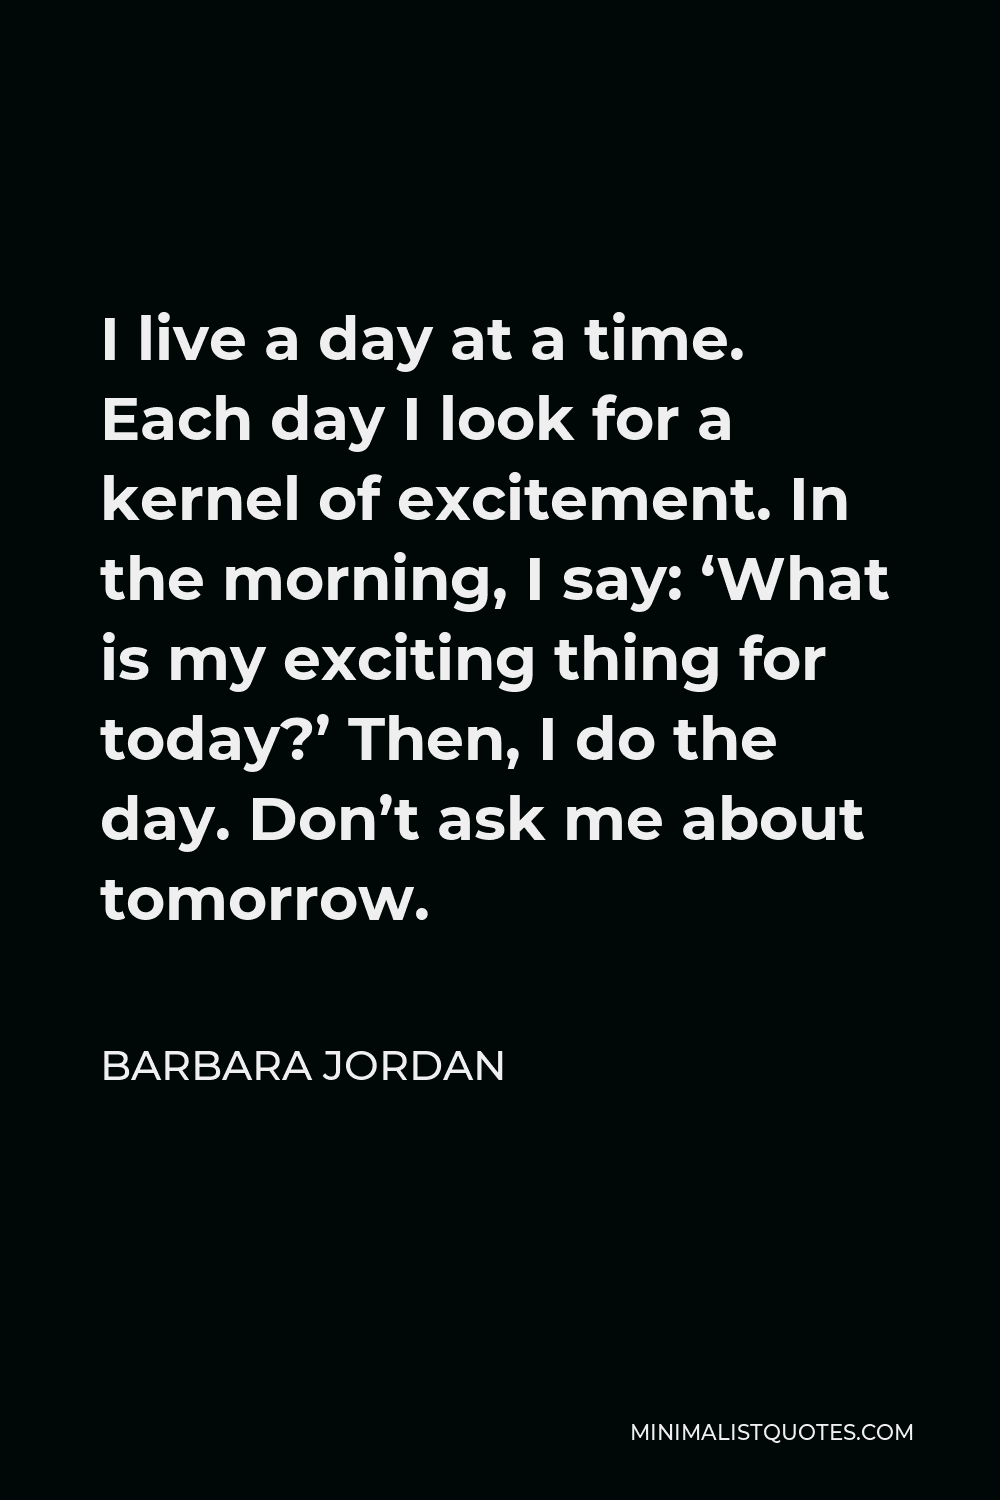 Barbara Jordan Quote - I live a day at a time. Each day I look for a kernel of excitement. In the morning, I say: ‘What is my exciting thing for today?’ Then, I do the day. Don’t ask me about tomorrow.